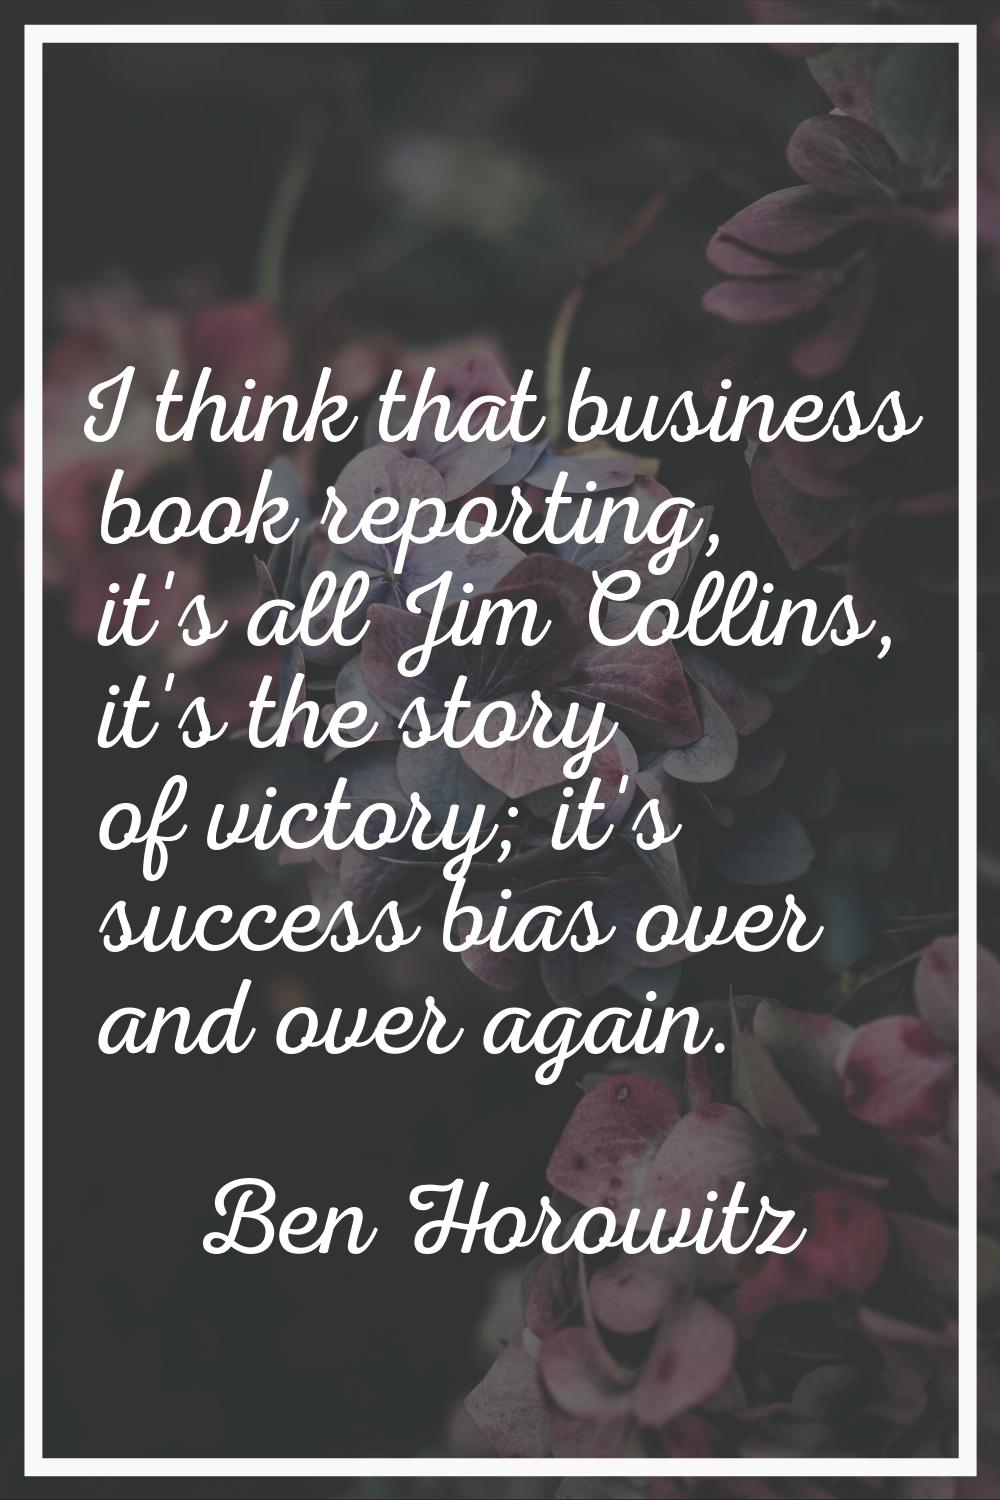 I think that business book reporting, it's all Jim Collins, it's the story of victory; it's success